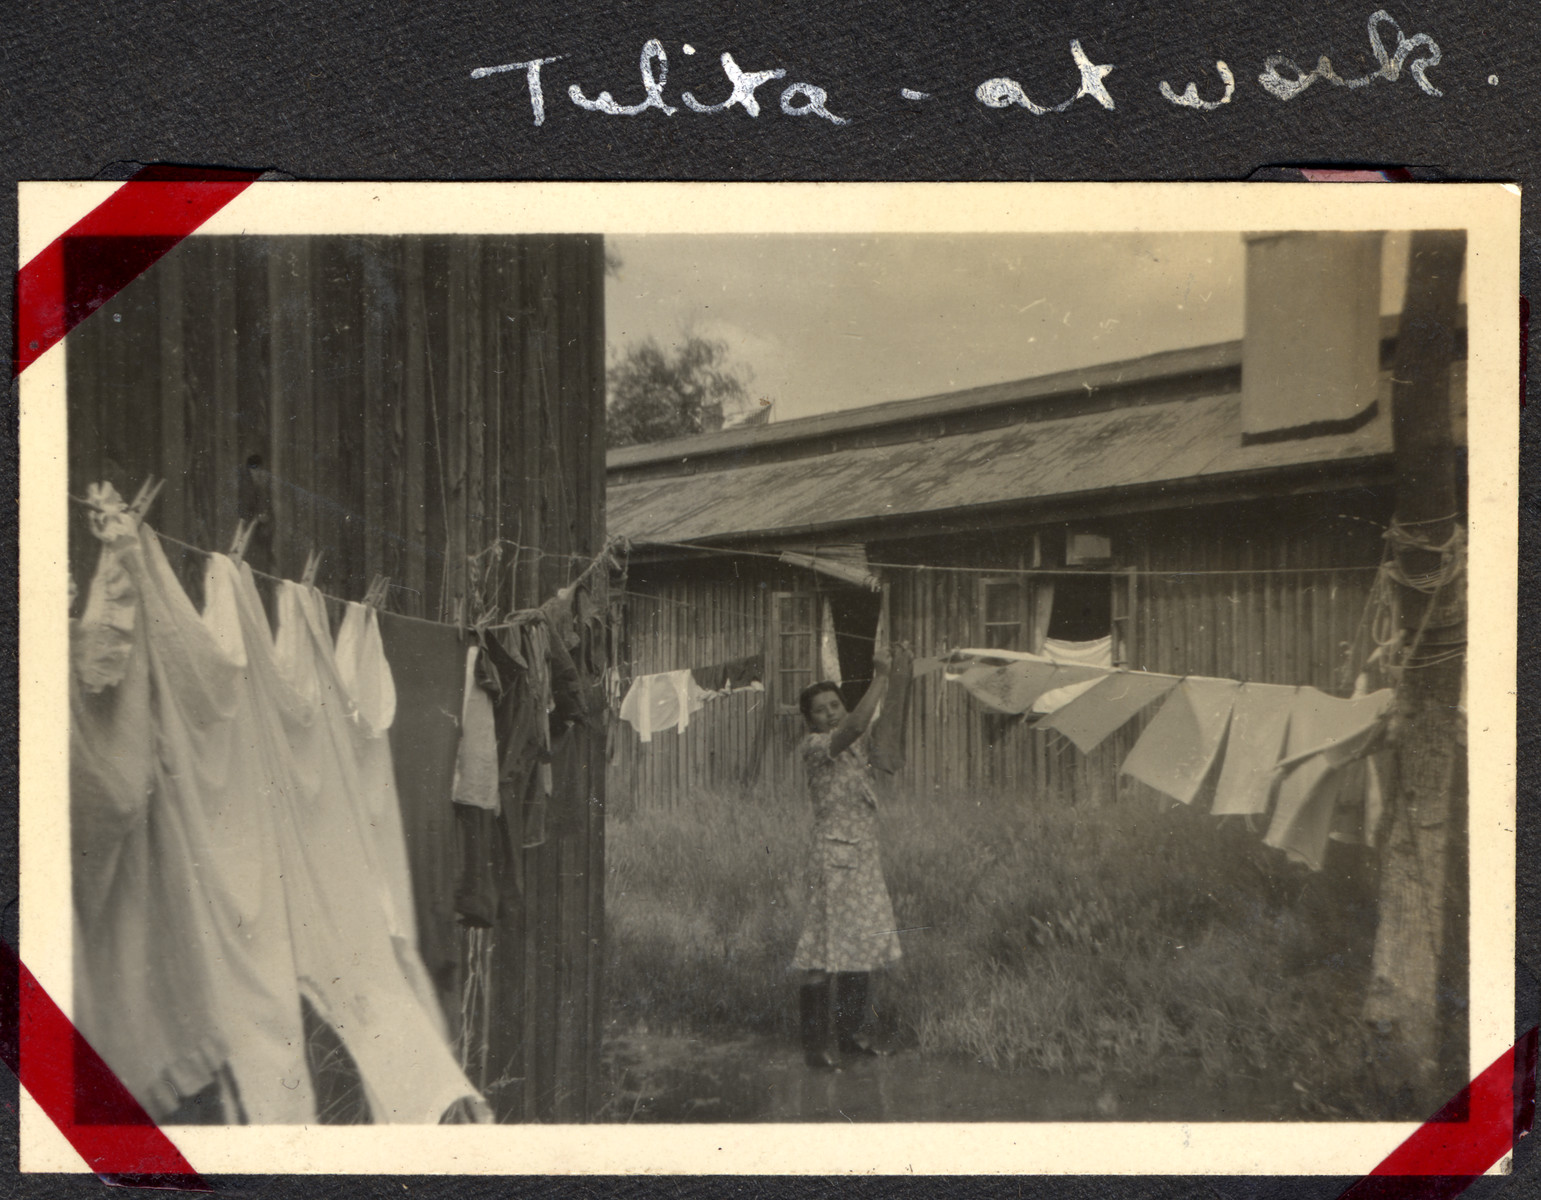 A woman hangs laundry up to dry in the Ash Colony in Shanghai.

The original caption reads, "Tulita - at work."